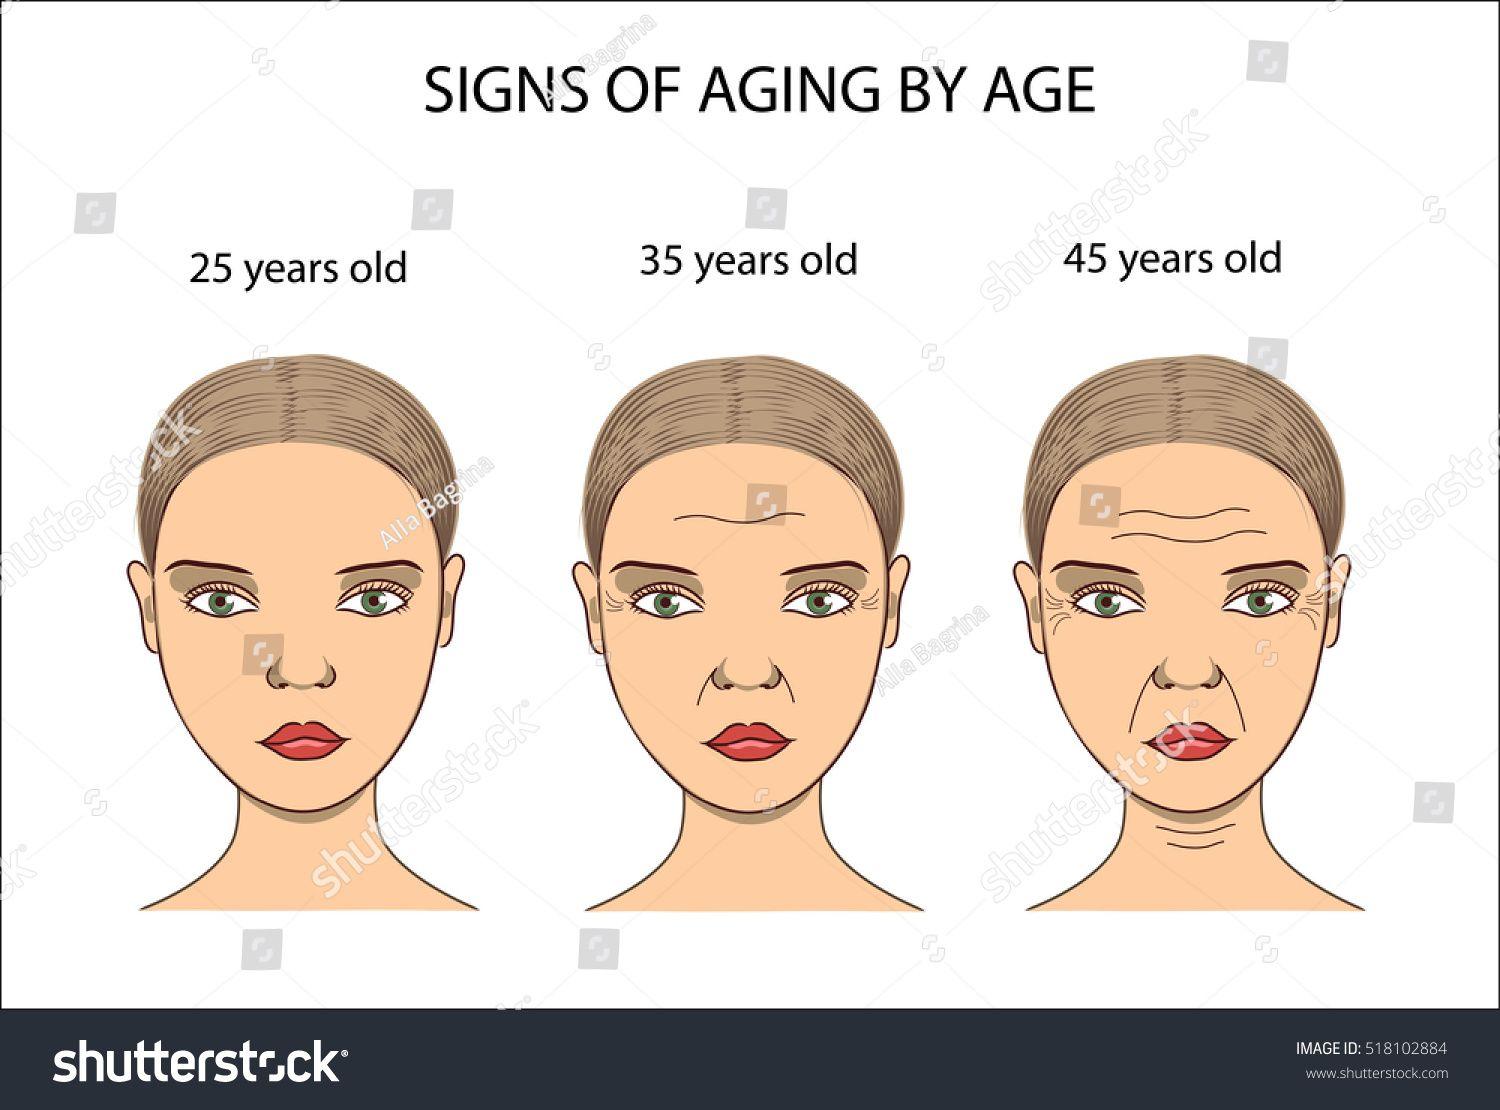 Punkin reccomend Website show facial changes with aging